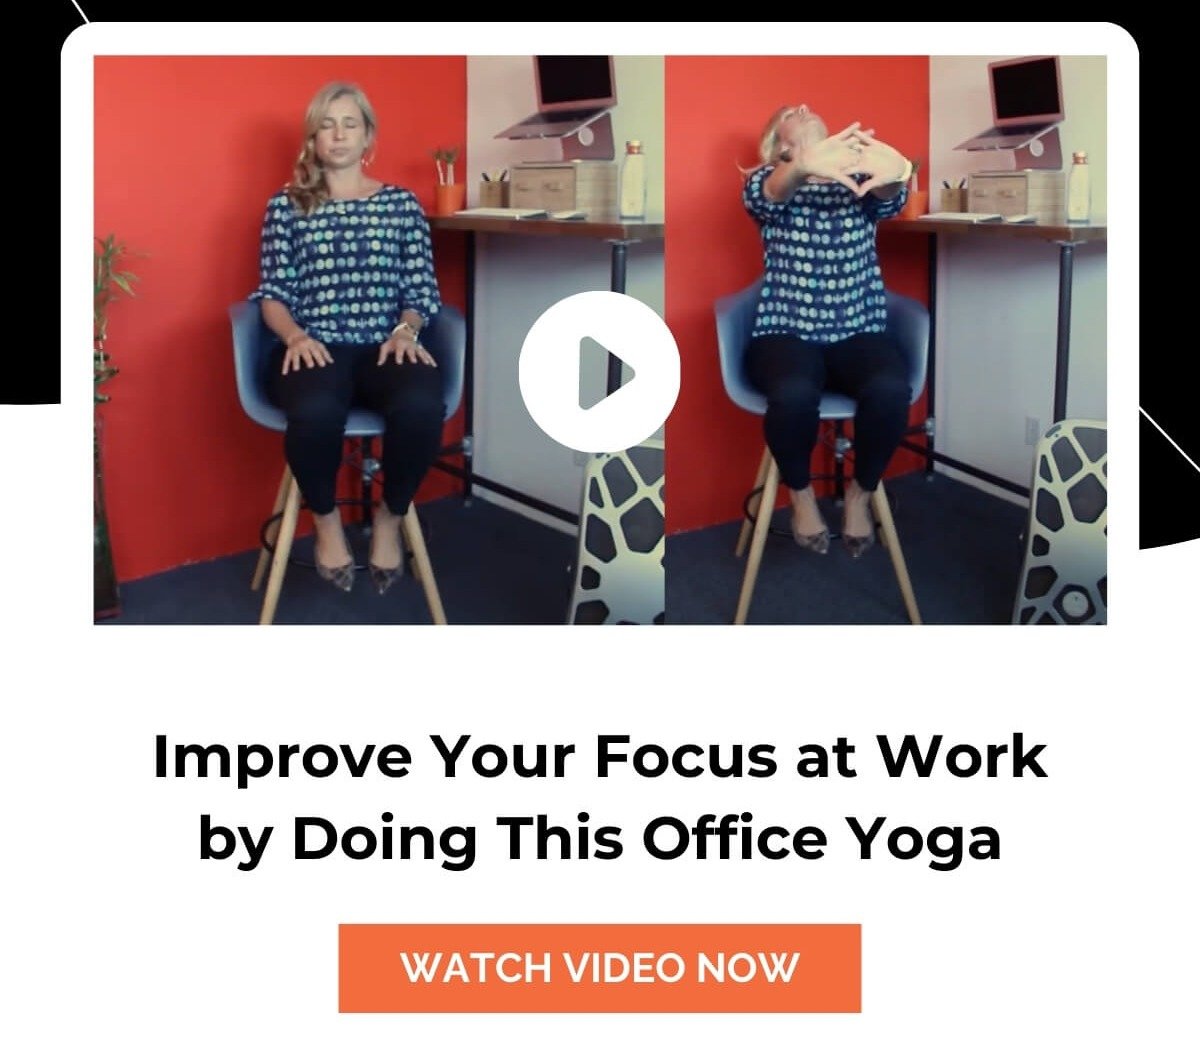 Introducing our Office Yoga Series - Focus at Work!